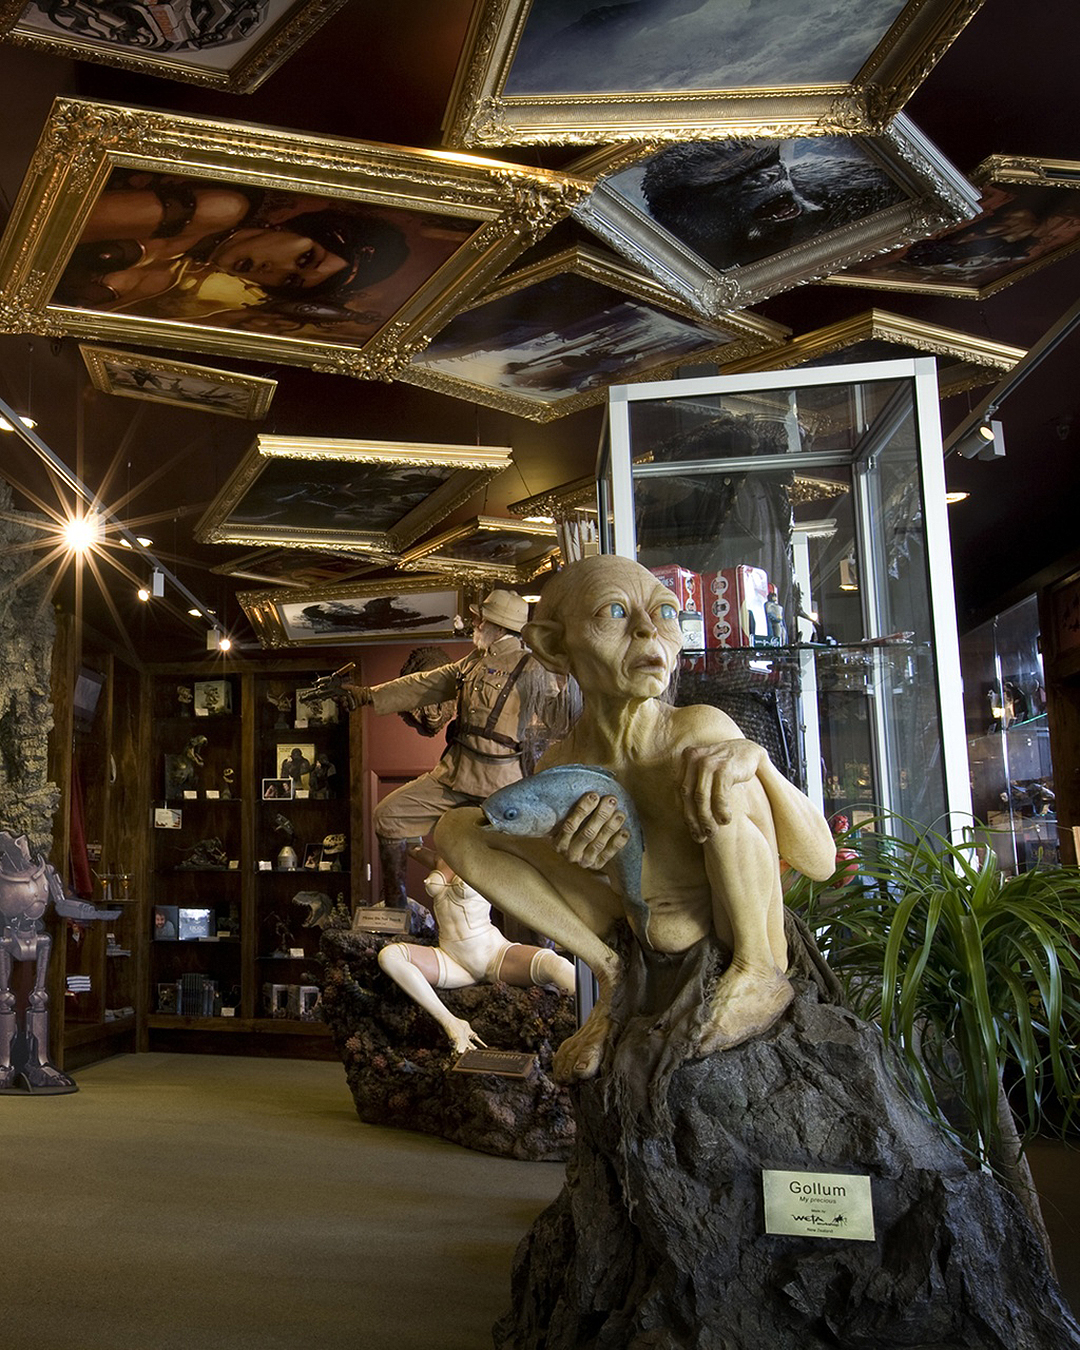 Weta Cave in Wellington with Gollum in the foreground.